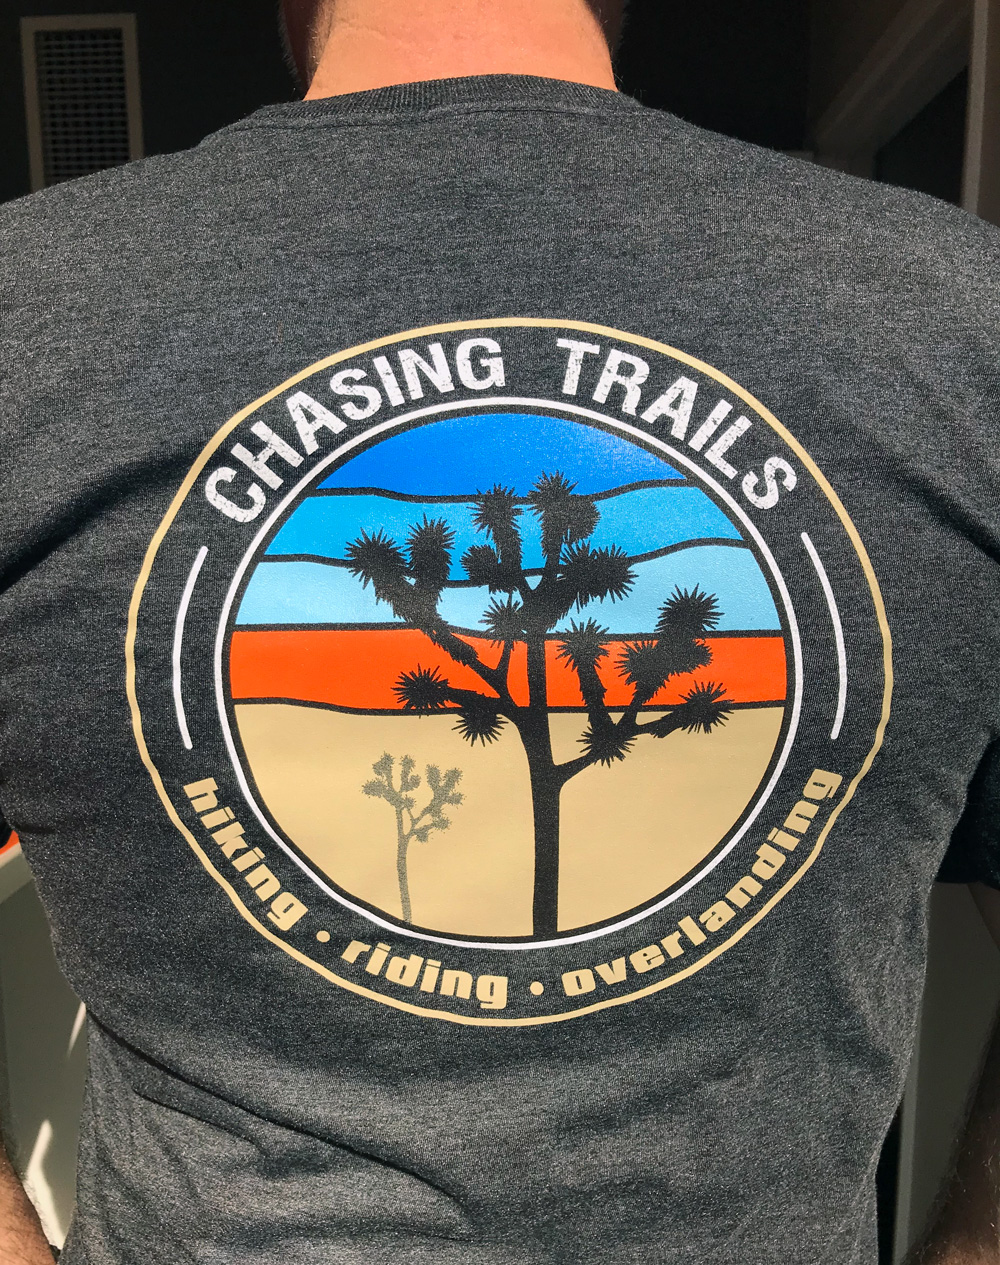 Chasing Trails Graphic T Shirt | Trail Industries